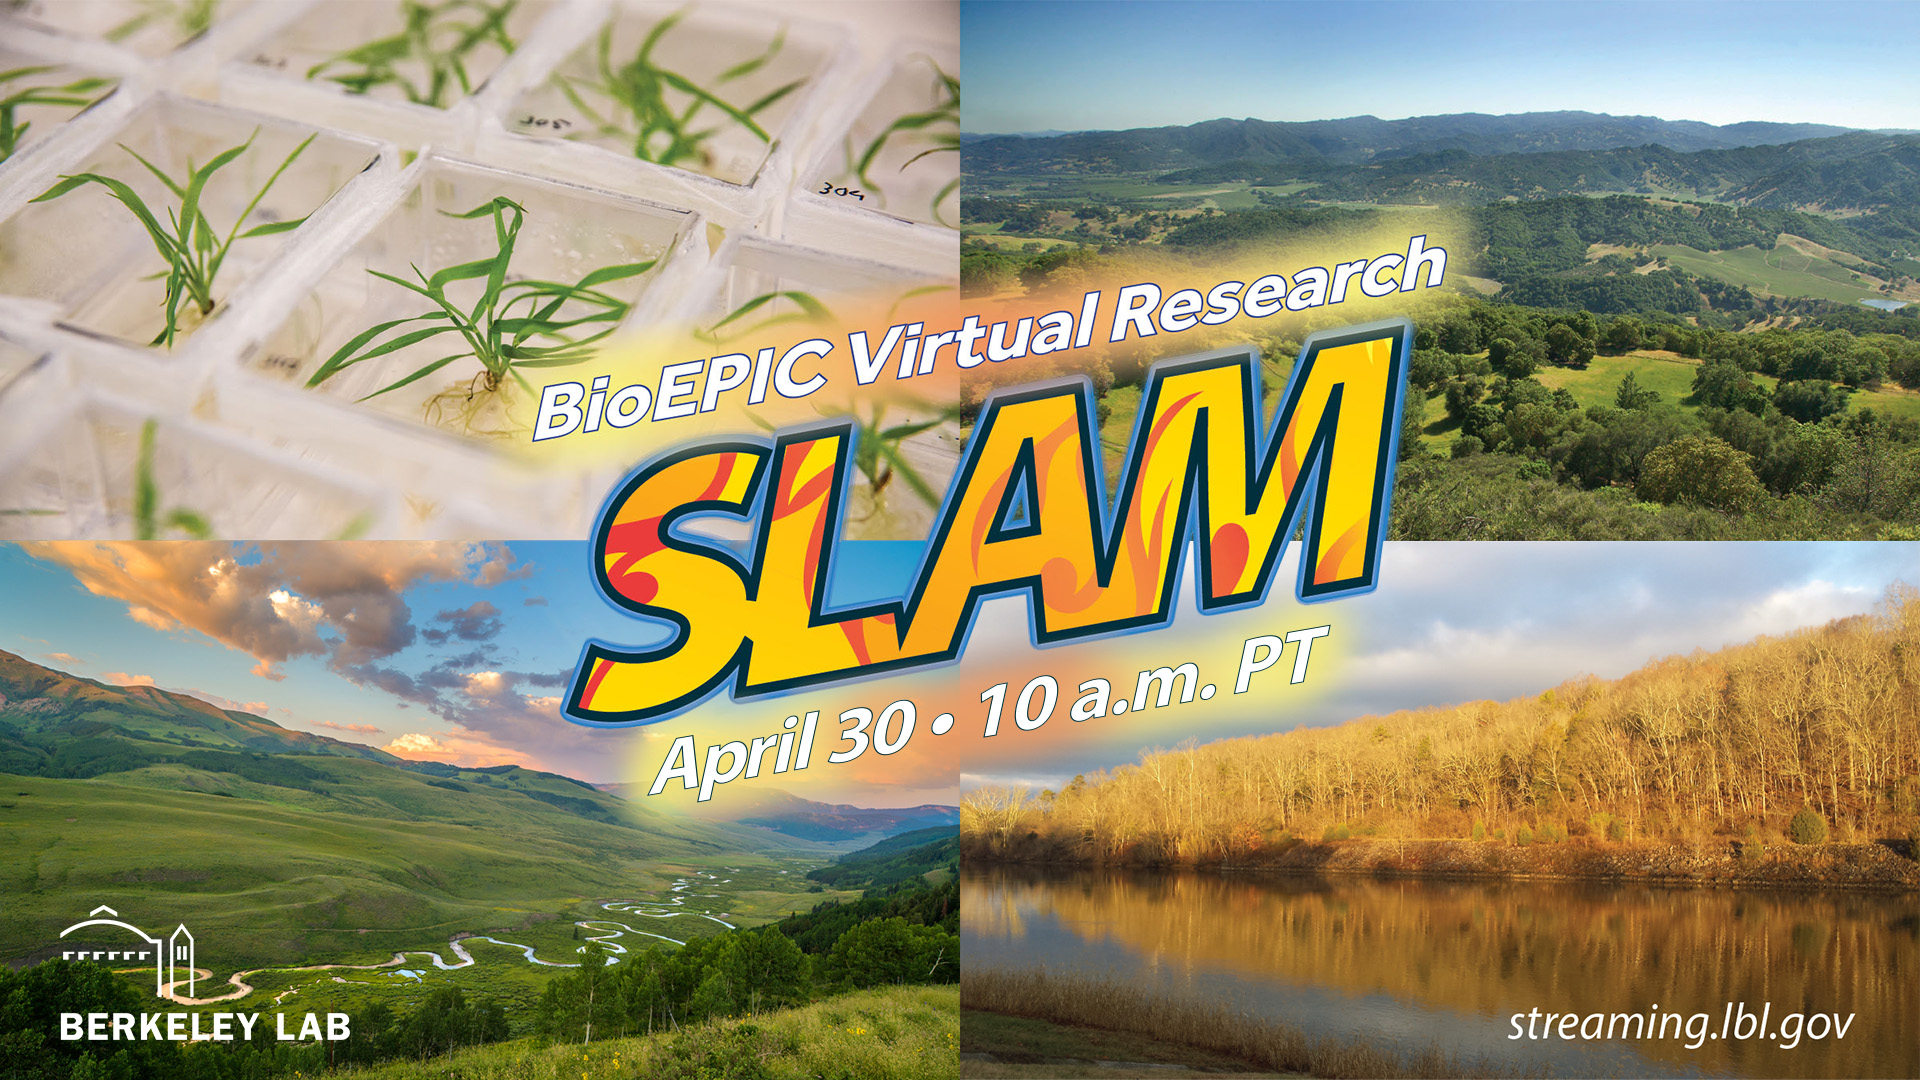 Graphic composite of four environmental photos with text overlaid "BioEPIC Virtual Research SLAM, April 30 - 10am PT"